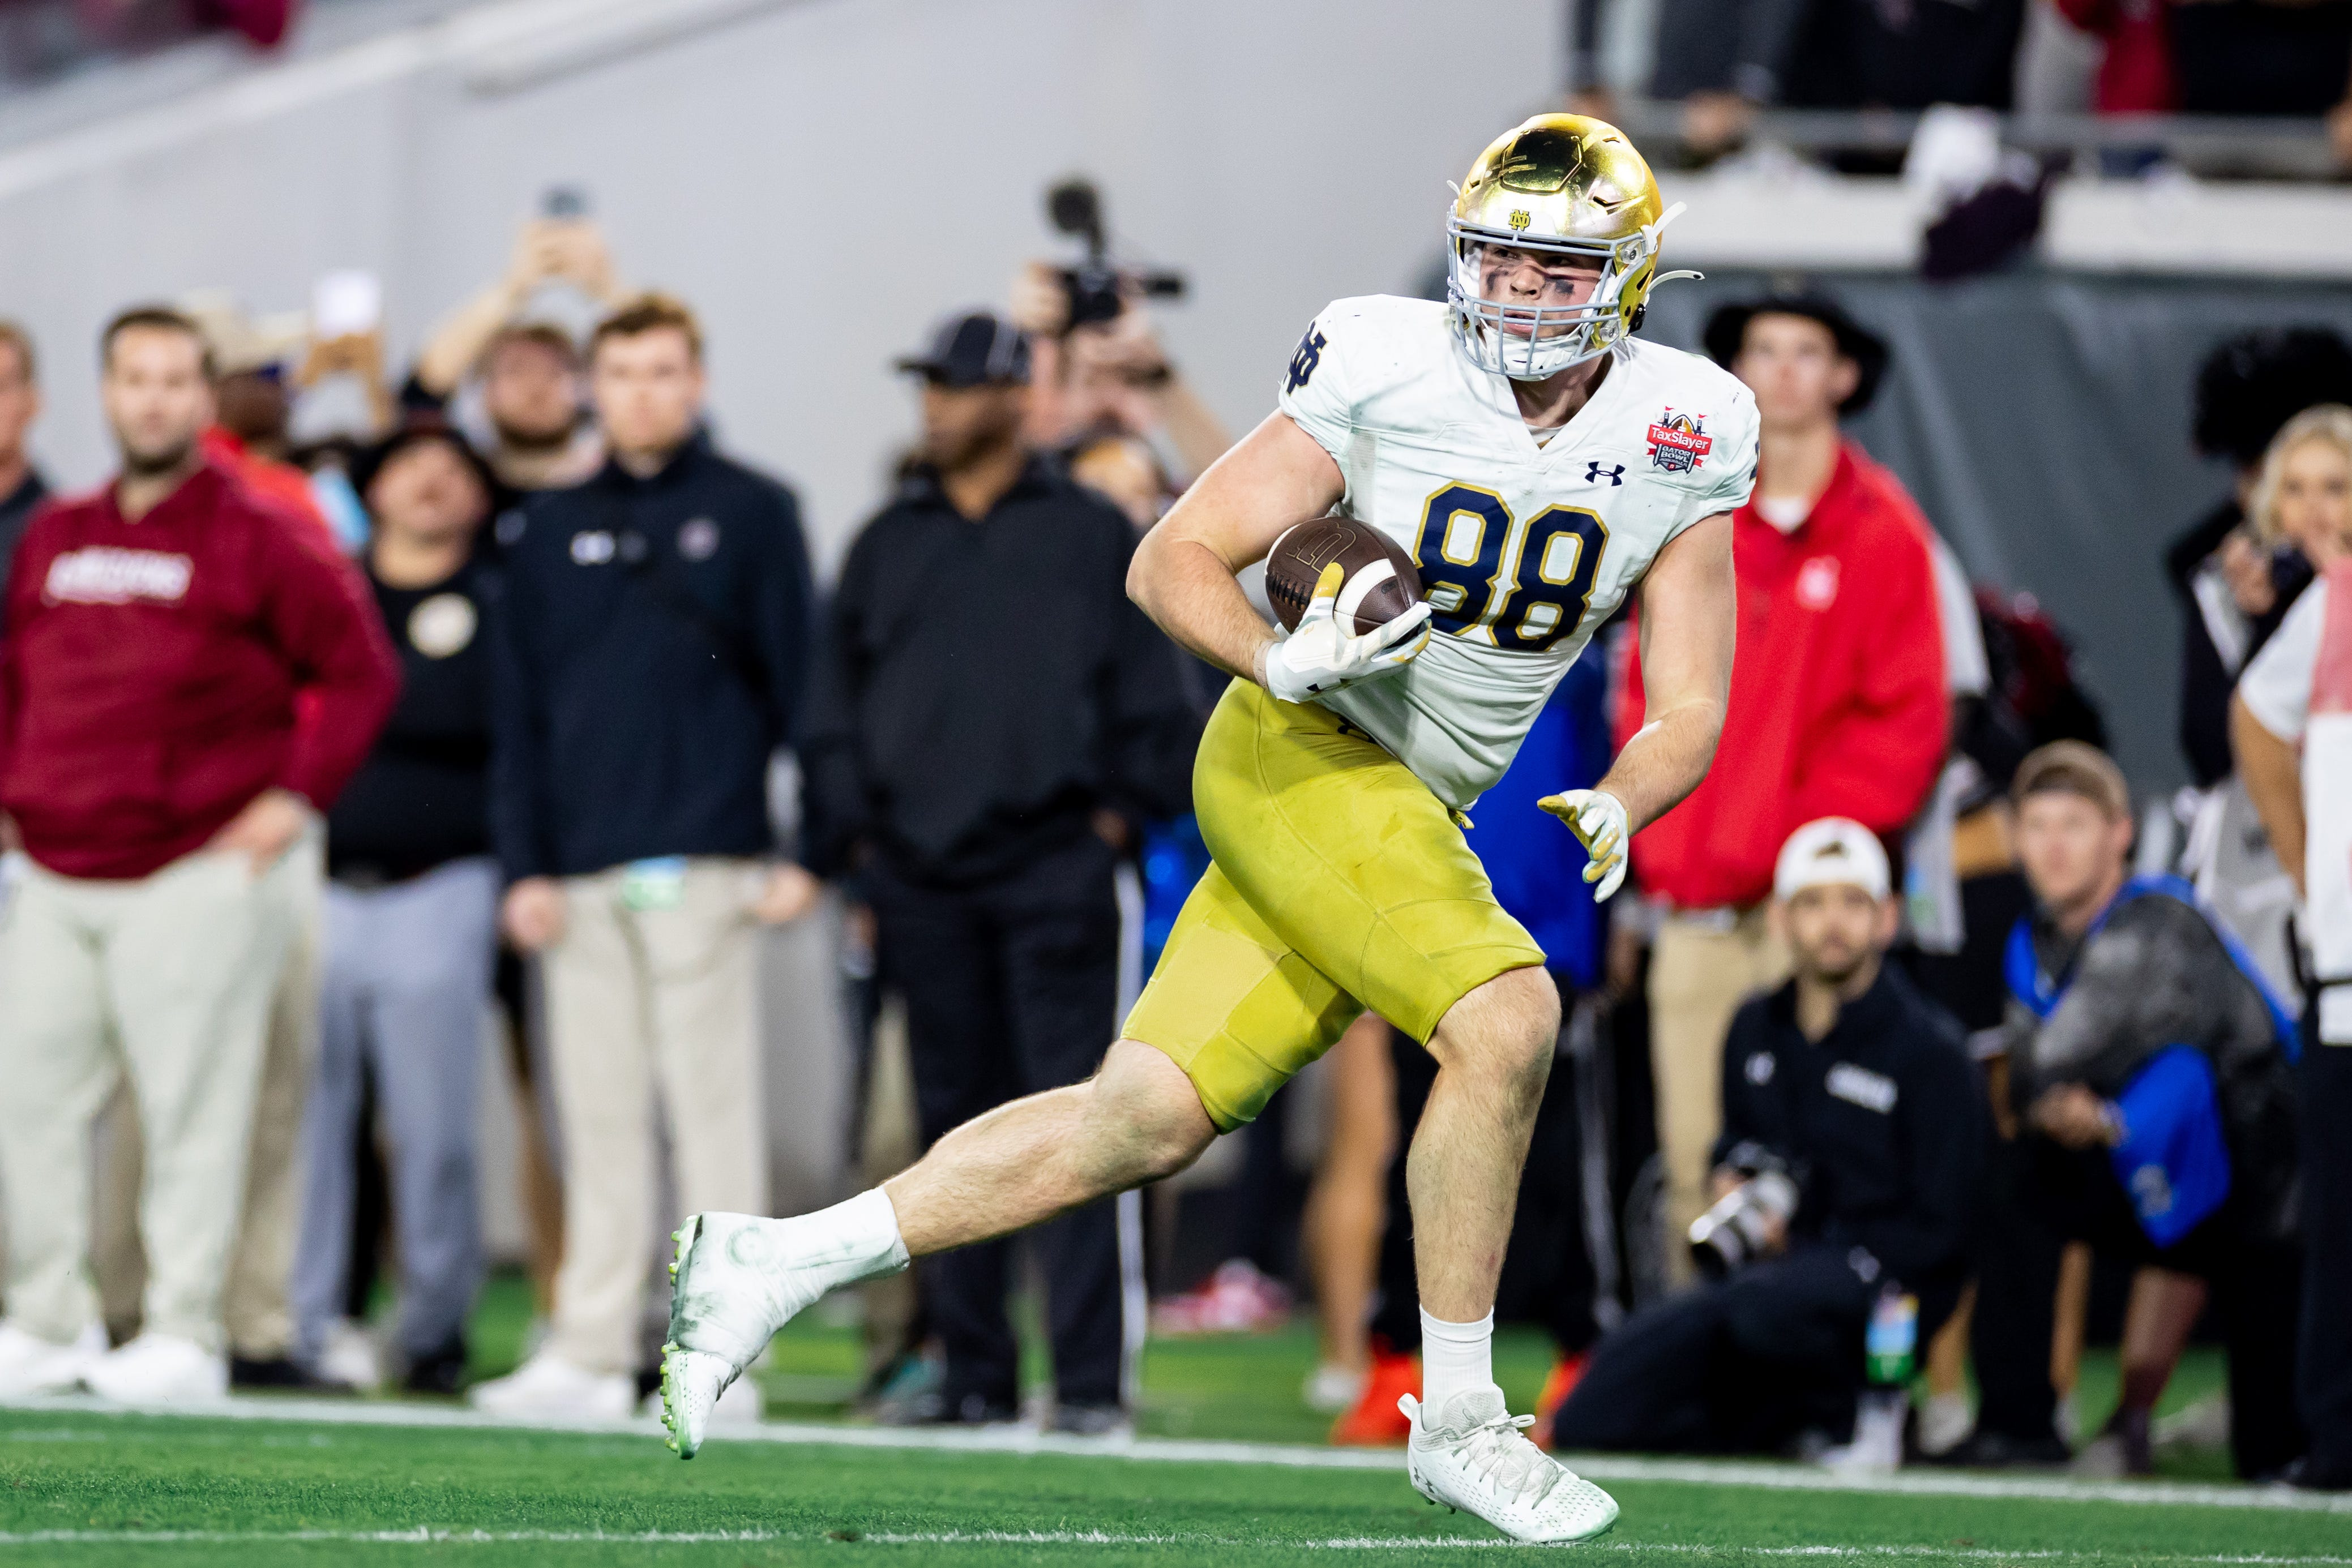 Dec 30, 2022; Jacksonville, FL, USA; Notre Dame Fighting Irish tight end Mitchell Evans (88) runs with the ball for a touchdown during the second half against the South Carolina Gamecocks in the 2022 Gator Bowl at TIAA Bank Field. Mandatory Credit: Matt Pendleton-USA TODAY Sports